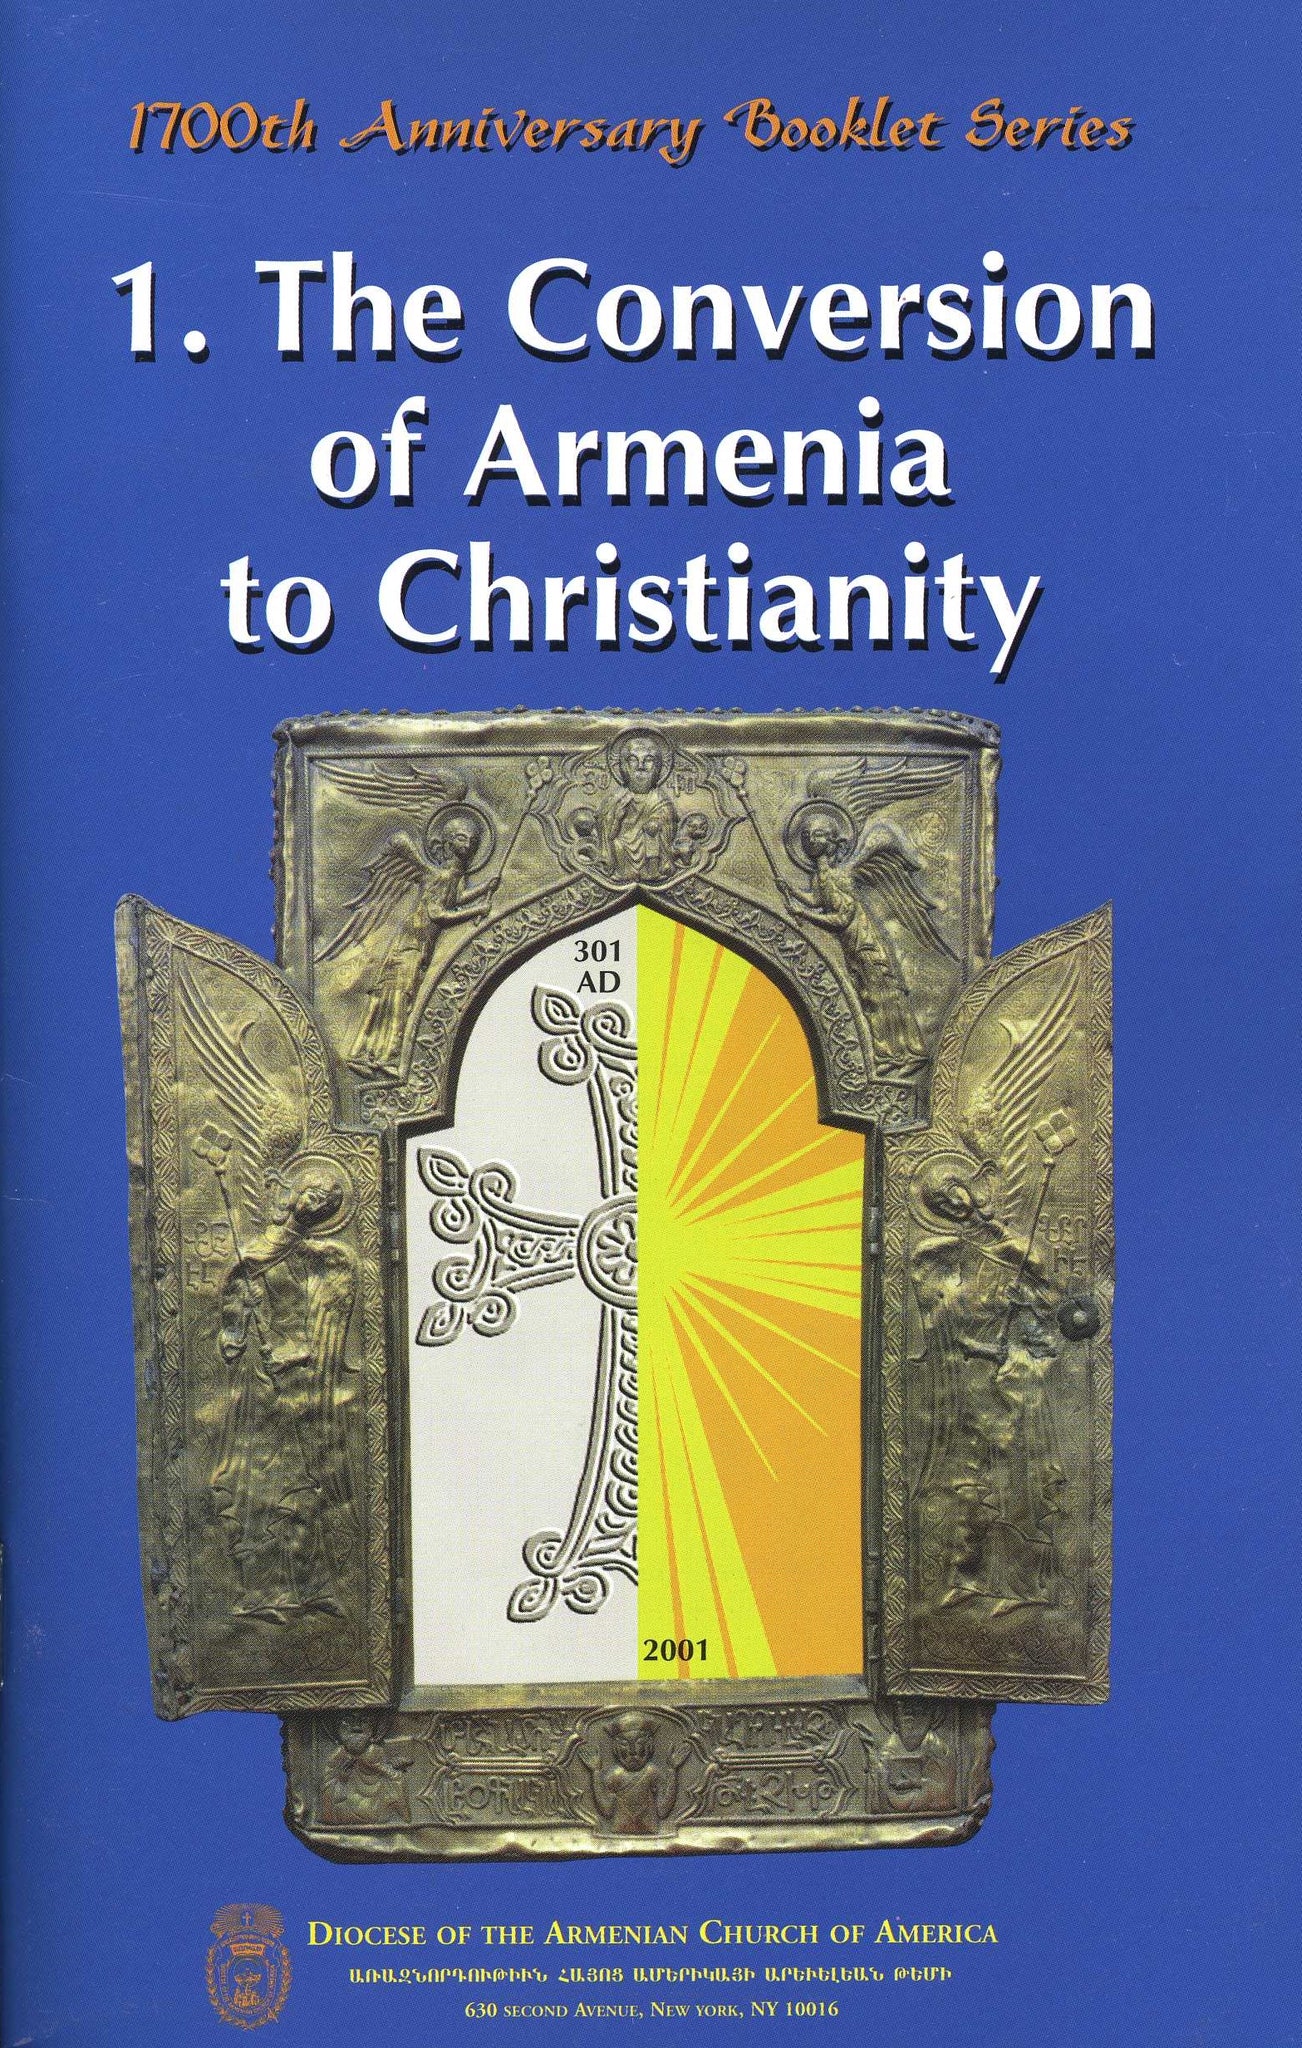 CONVERSION OF ARMENIA TO CHRISTIANITY: A Retelling of Agathangelos' History